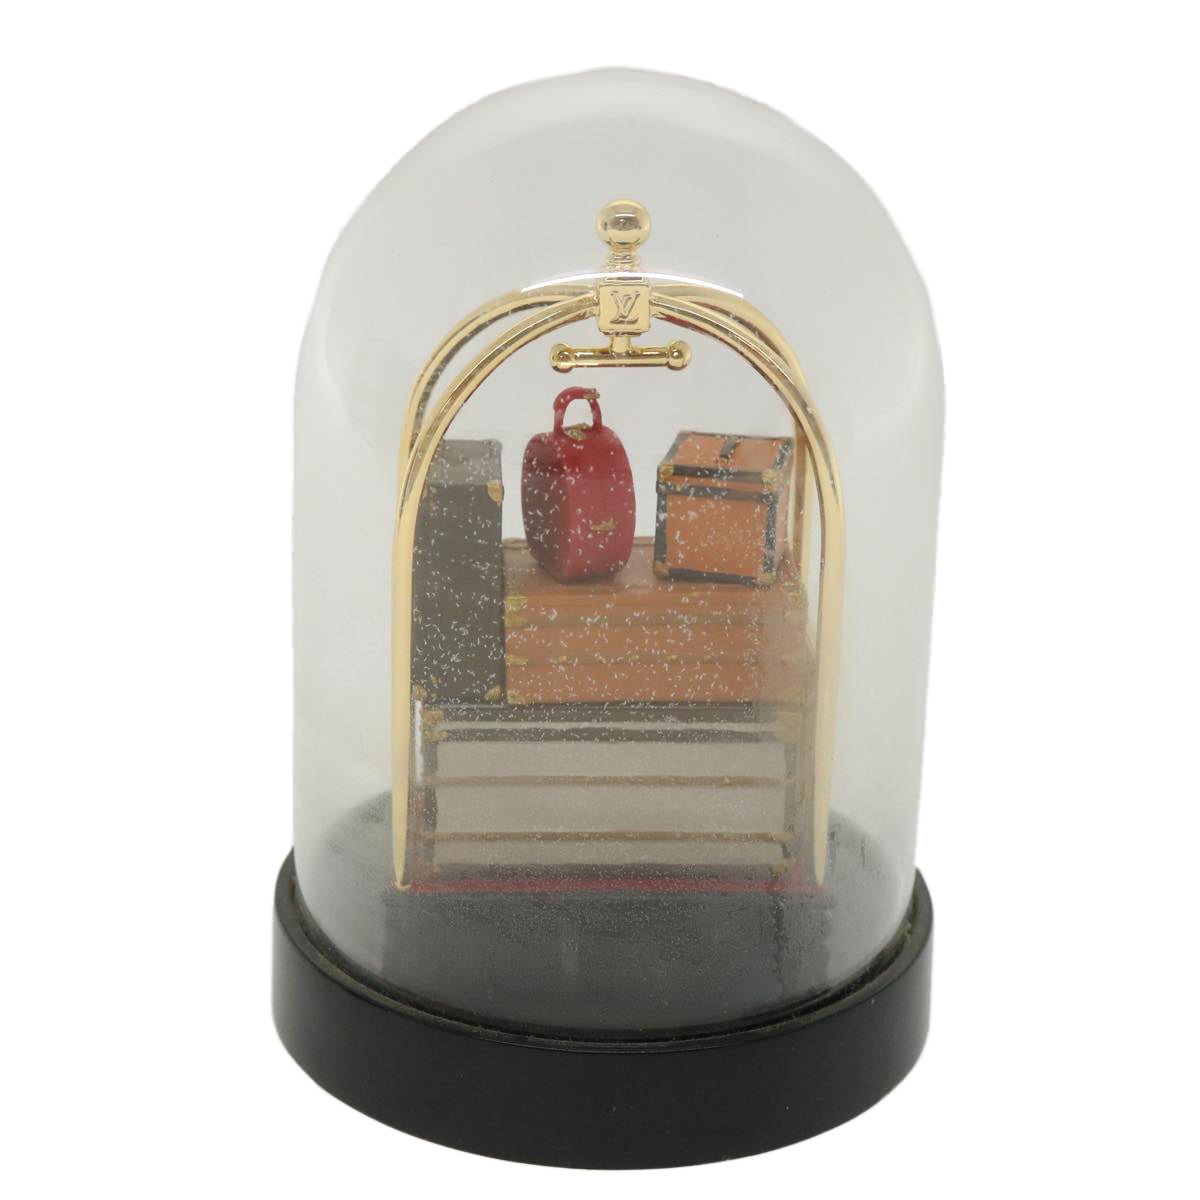 LOUIS VUITTON Trunk Snow Globe VIP only Multicolor M99407 LV Auth 32297A